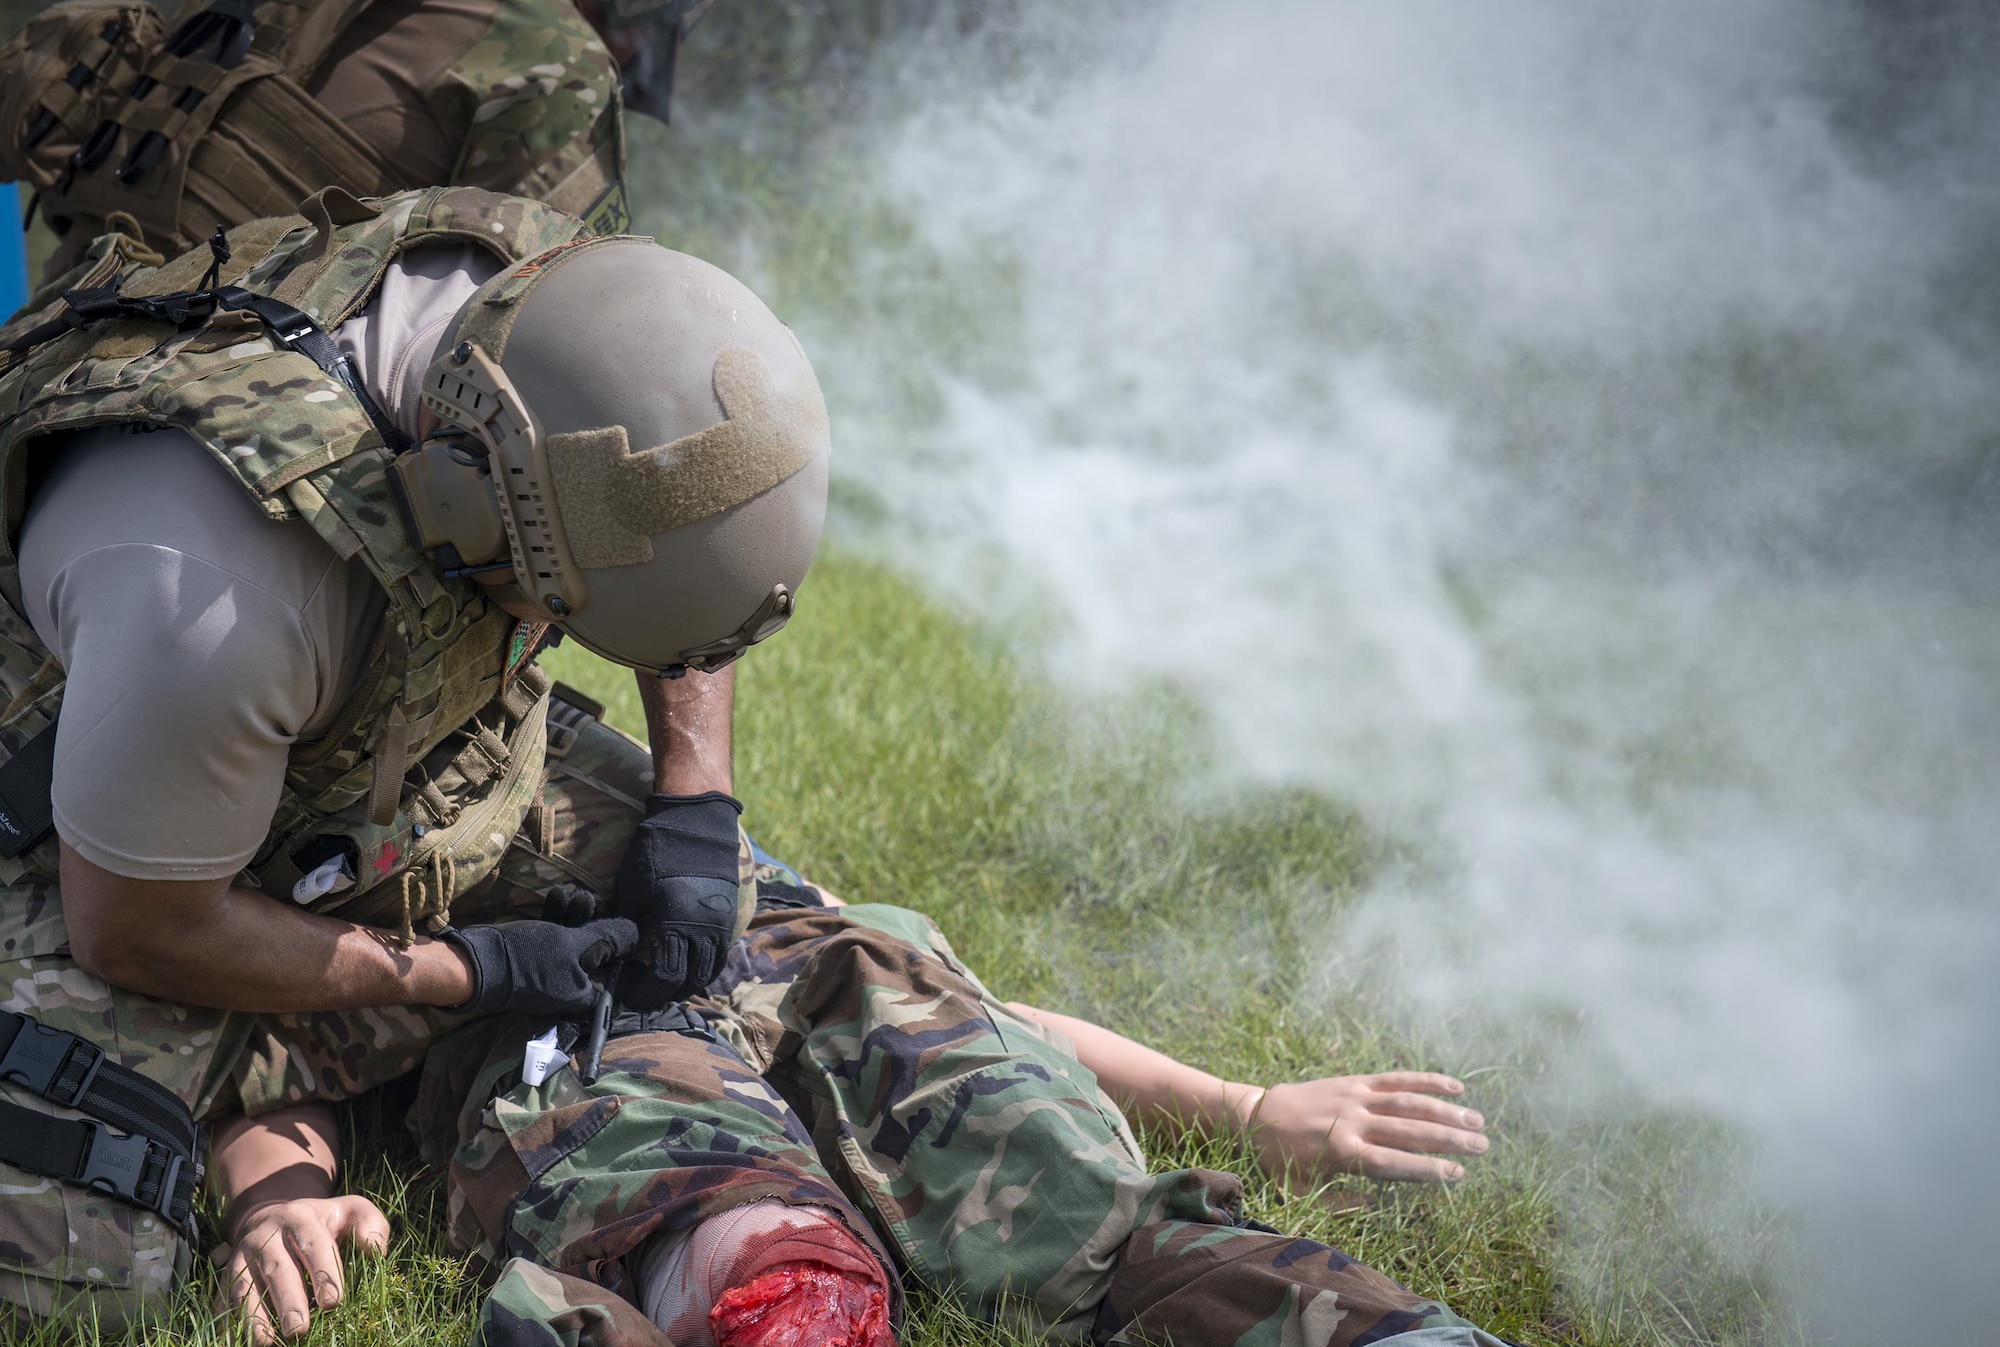 U.S. Air Force Tech. Sgt. Jose Obregon, 347th Operations Support Squadron independent duty medical technician-paramedic, applies a tourniquet to a simulated patient during a tactical combat casualty care course, Sept. 22, 2016, in Okeechobee, Fla. In order to simulate realistic human flesh, the instructors used pork meat and fake blood in conjunction with the mannequins. (U.S. Air Force photo by Staff Sgt. Ryan Callaghan)